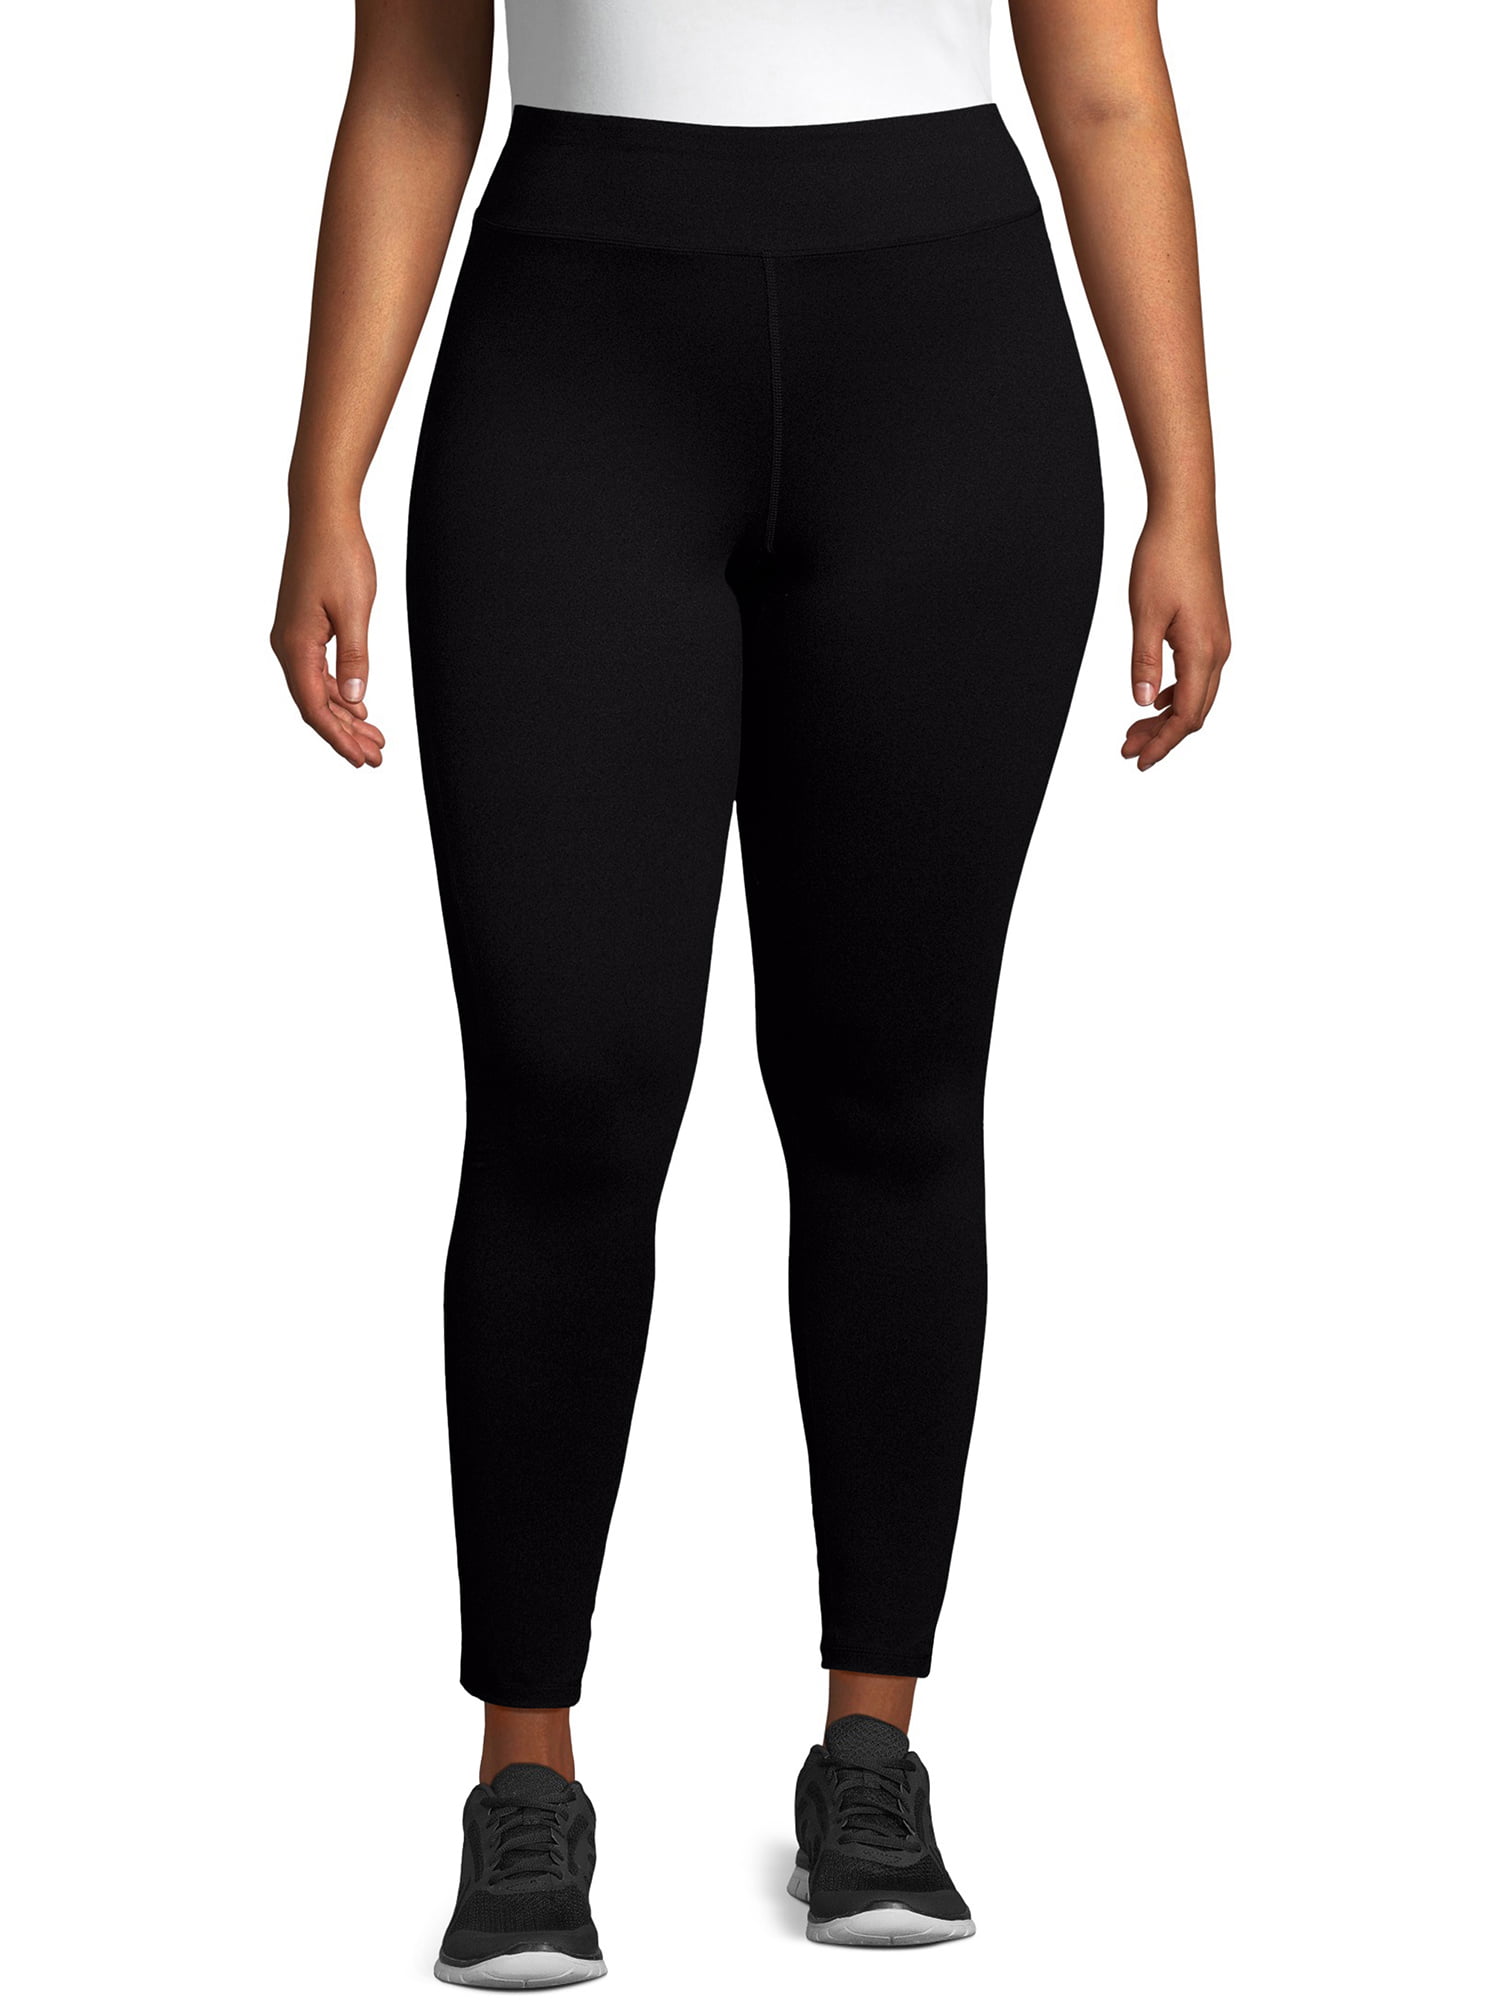 Just My Size Women's Plus Size Active Full Length Legging